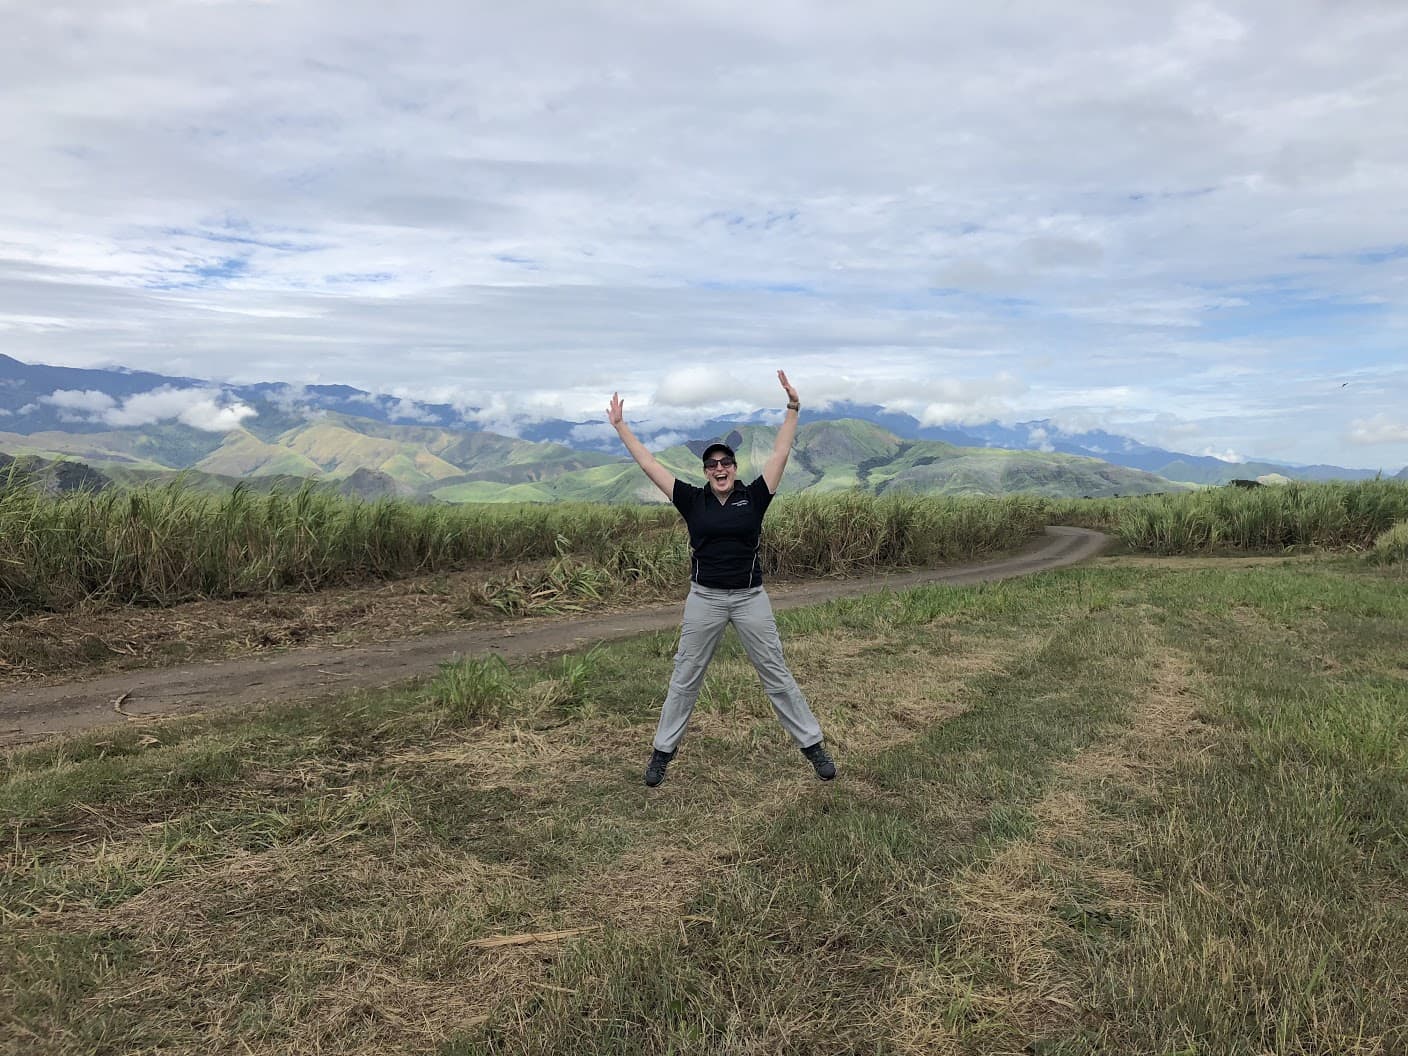 Renae Bice jumping in front of the sugar cane farm in PNG